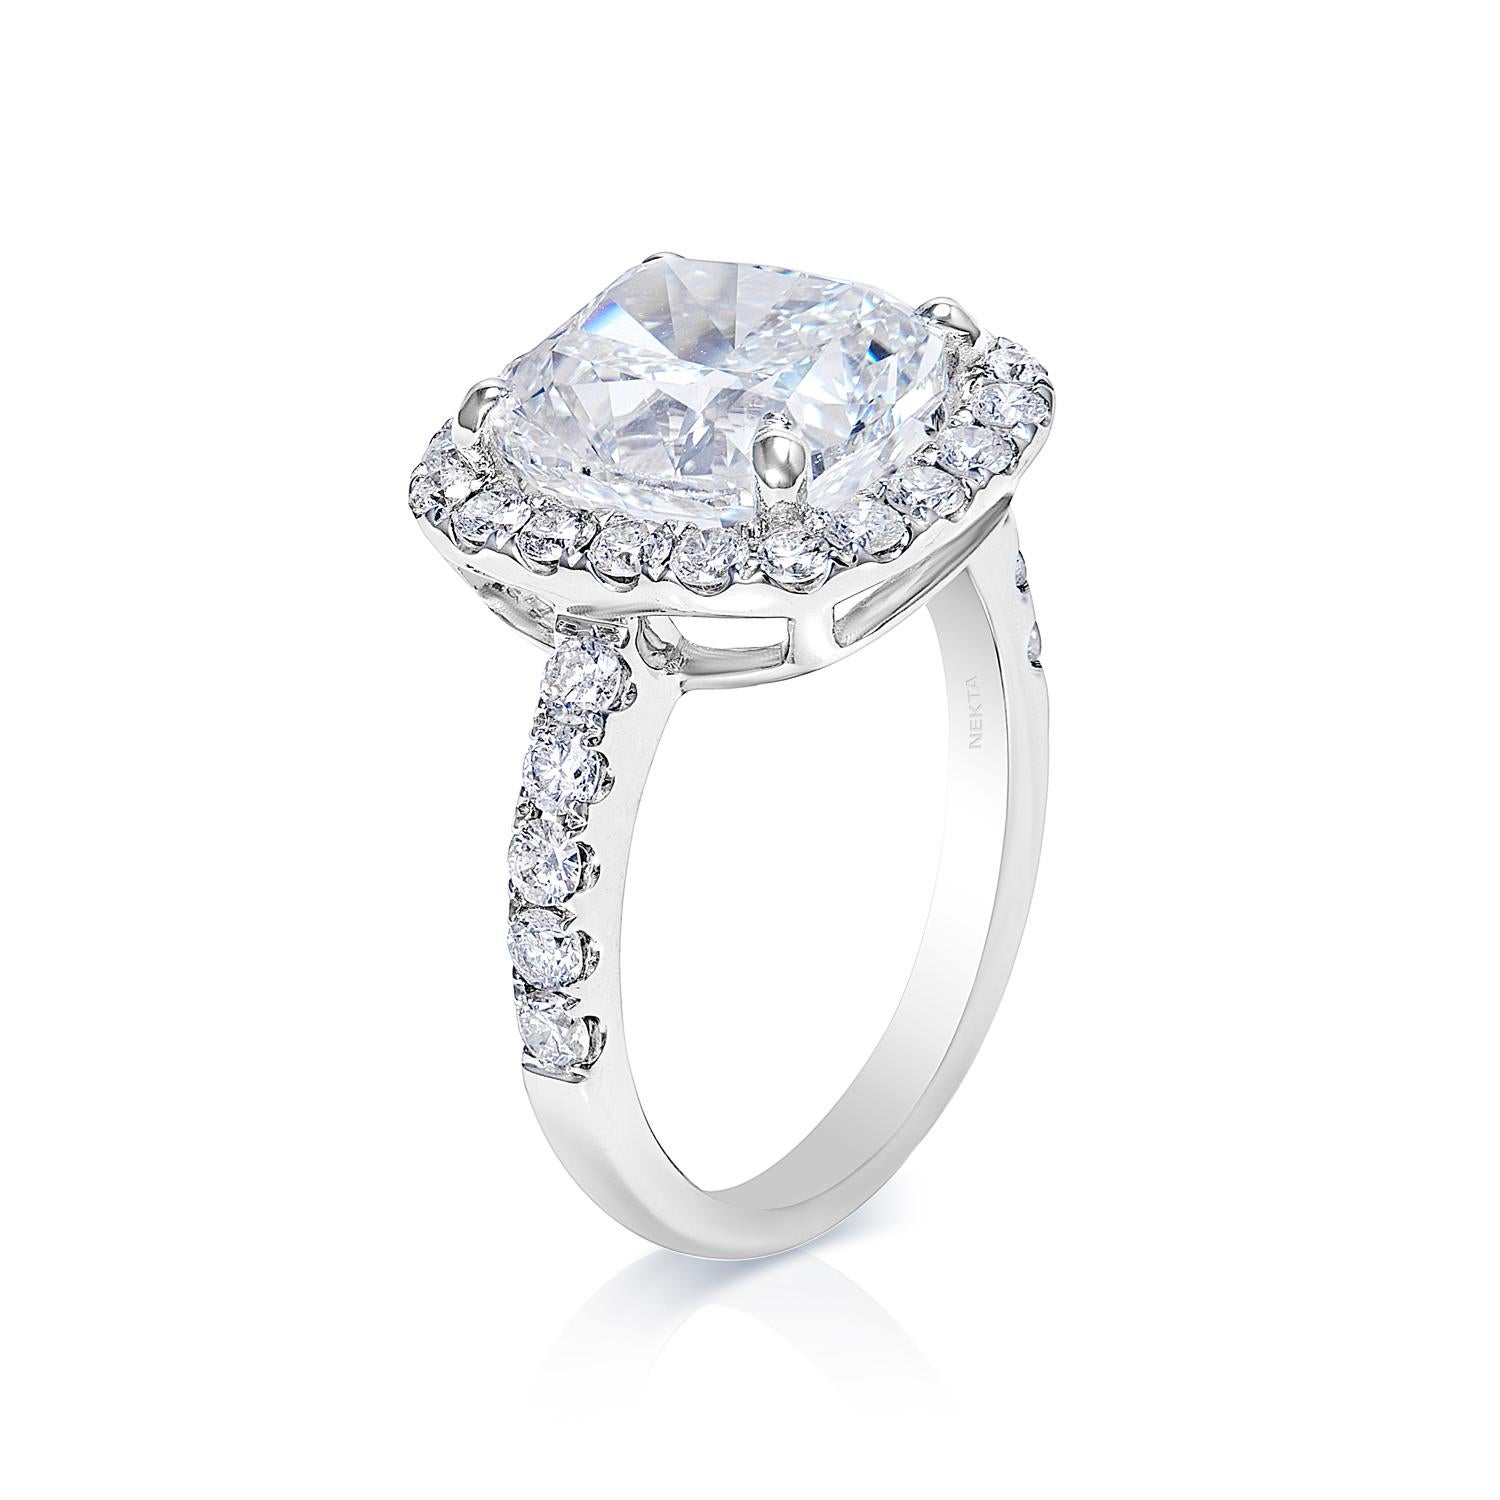 6 Carat Cushion Cut Diamond Engagement Ring GIA Certified G IF In New Condition For Sale In New York, NY